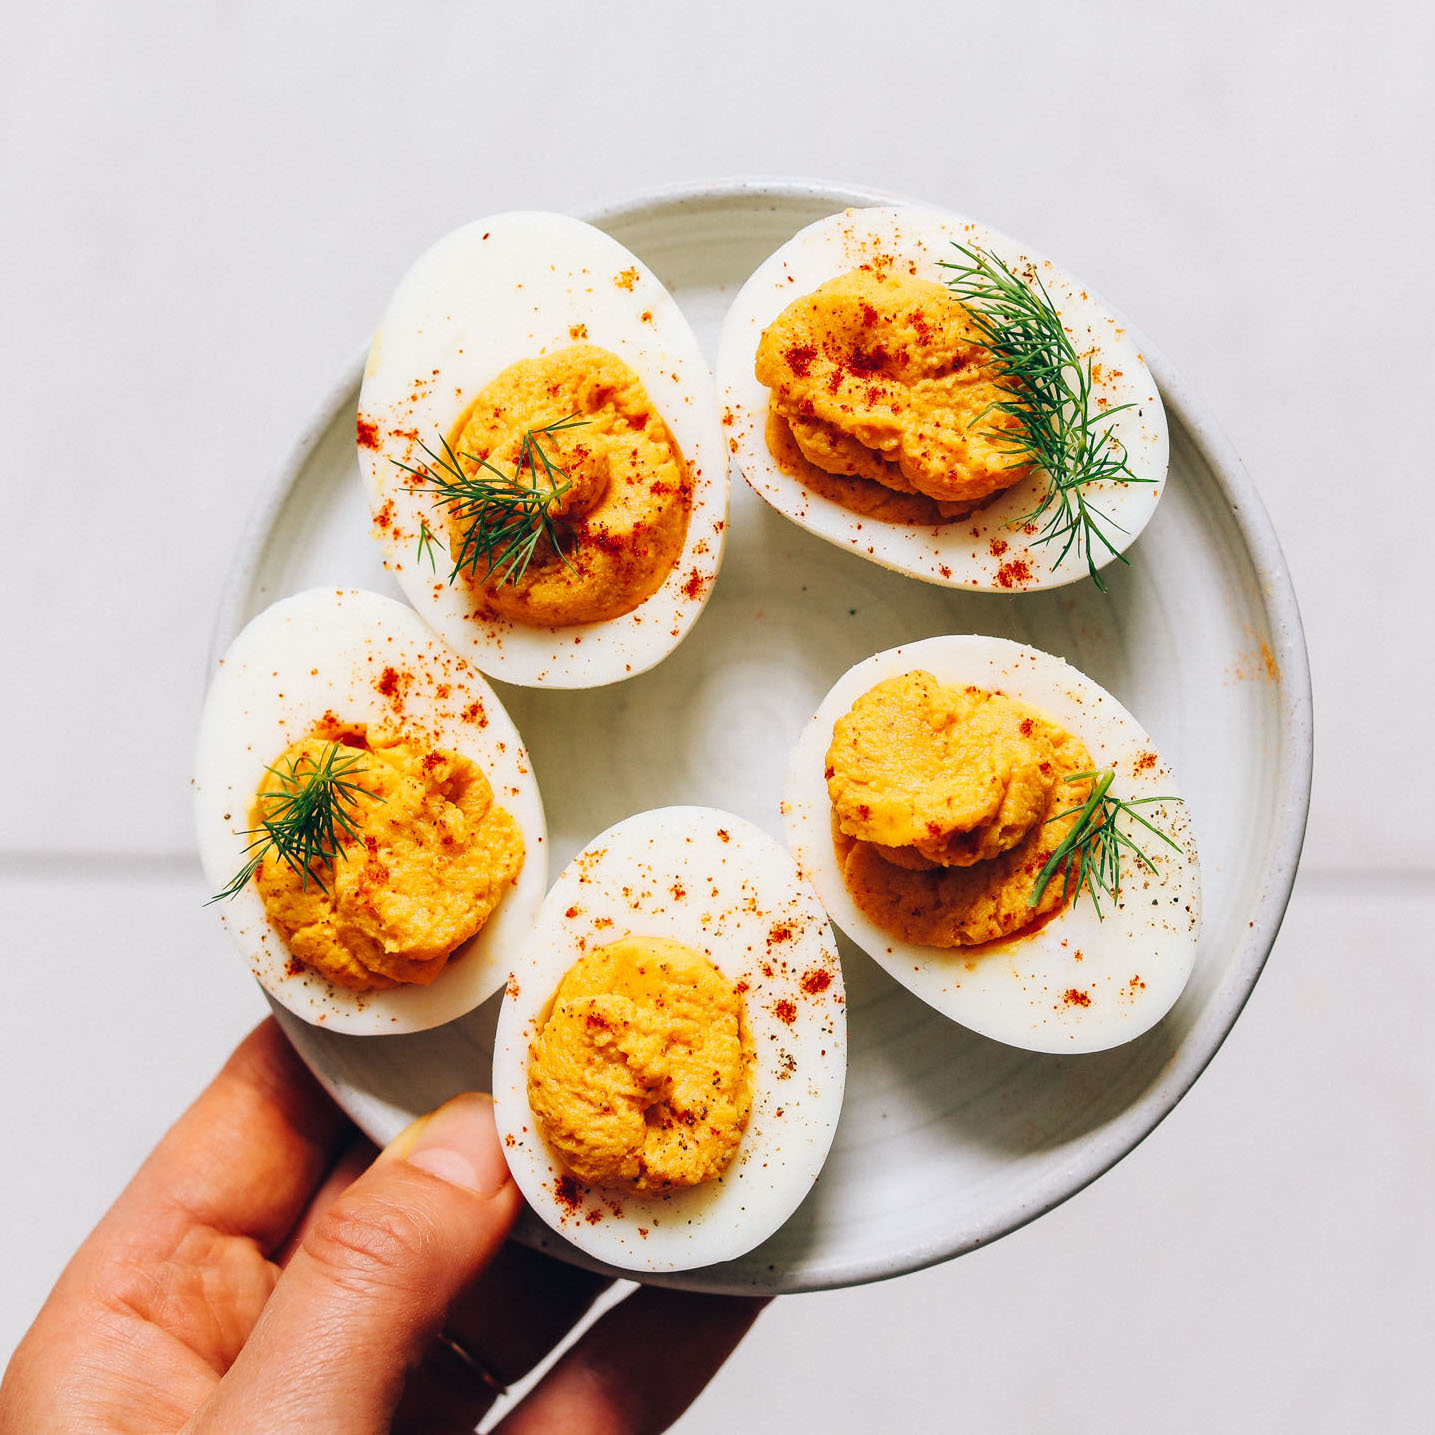 Plate of Mayo-Free Deviled Eggs seasoned with turmeric, honey, and other spices